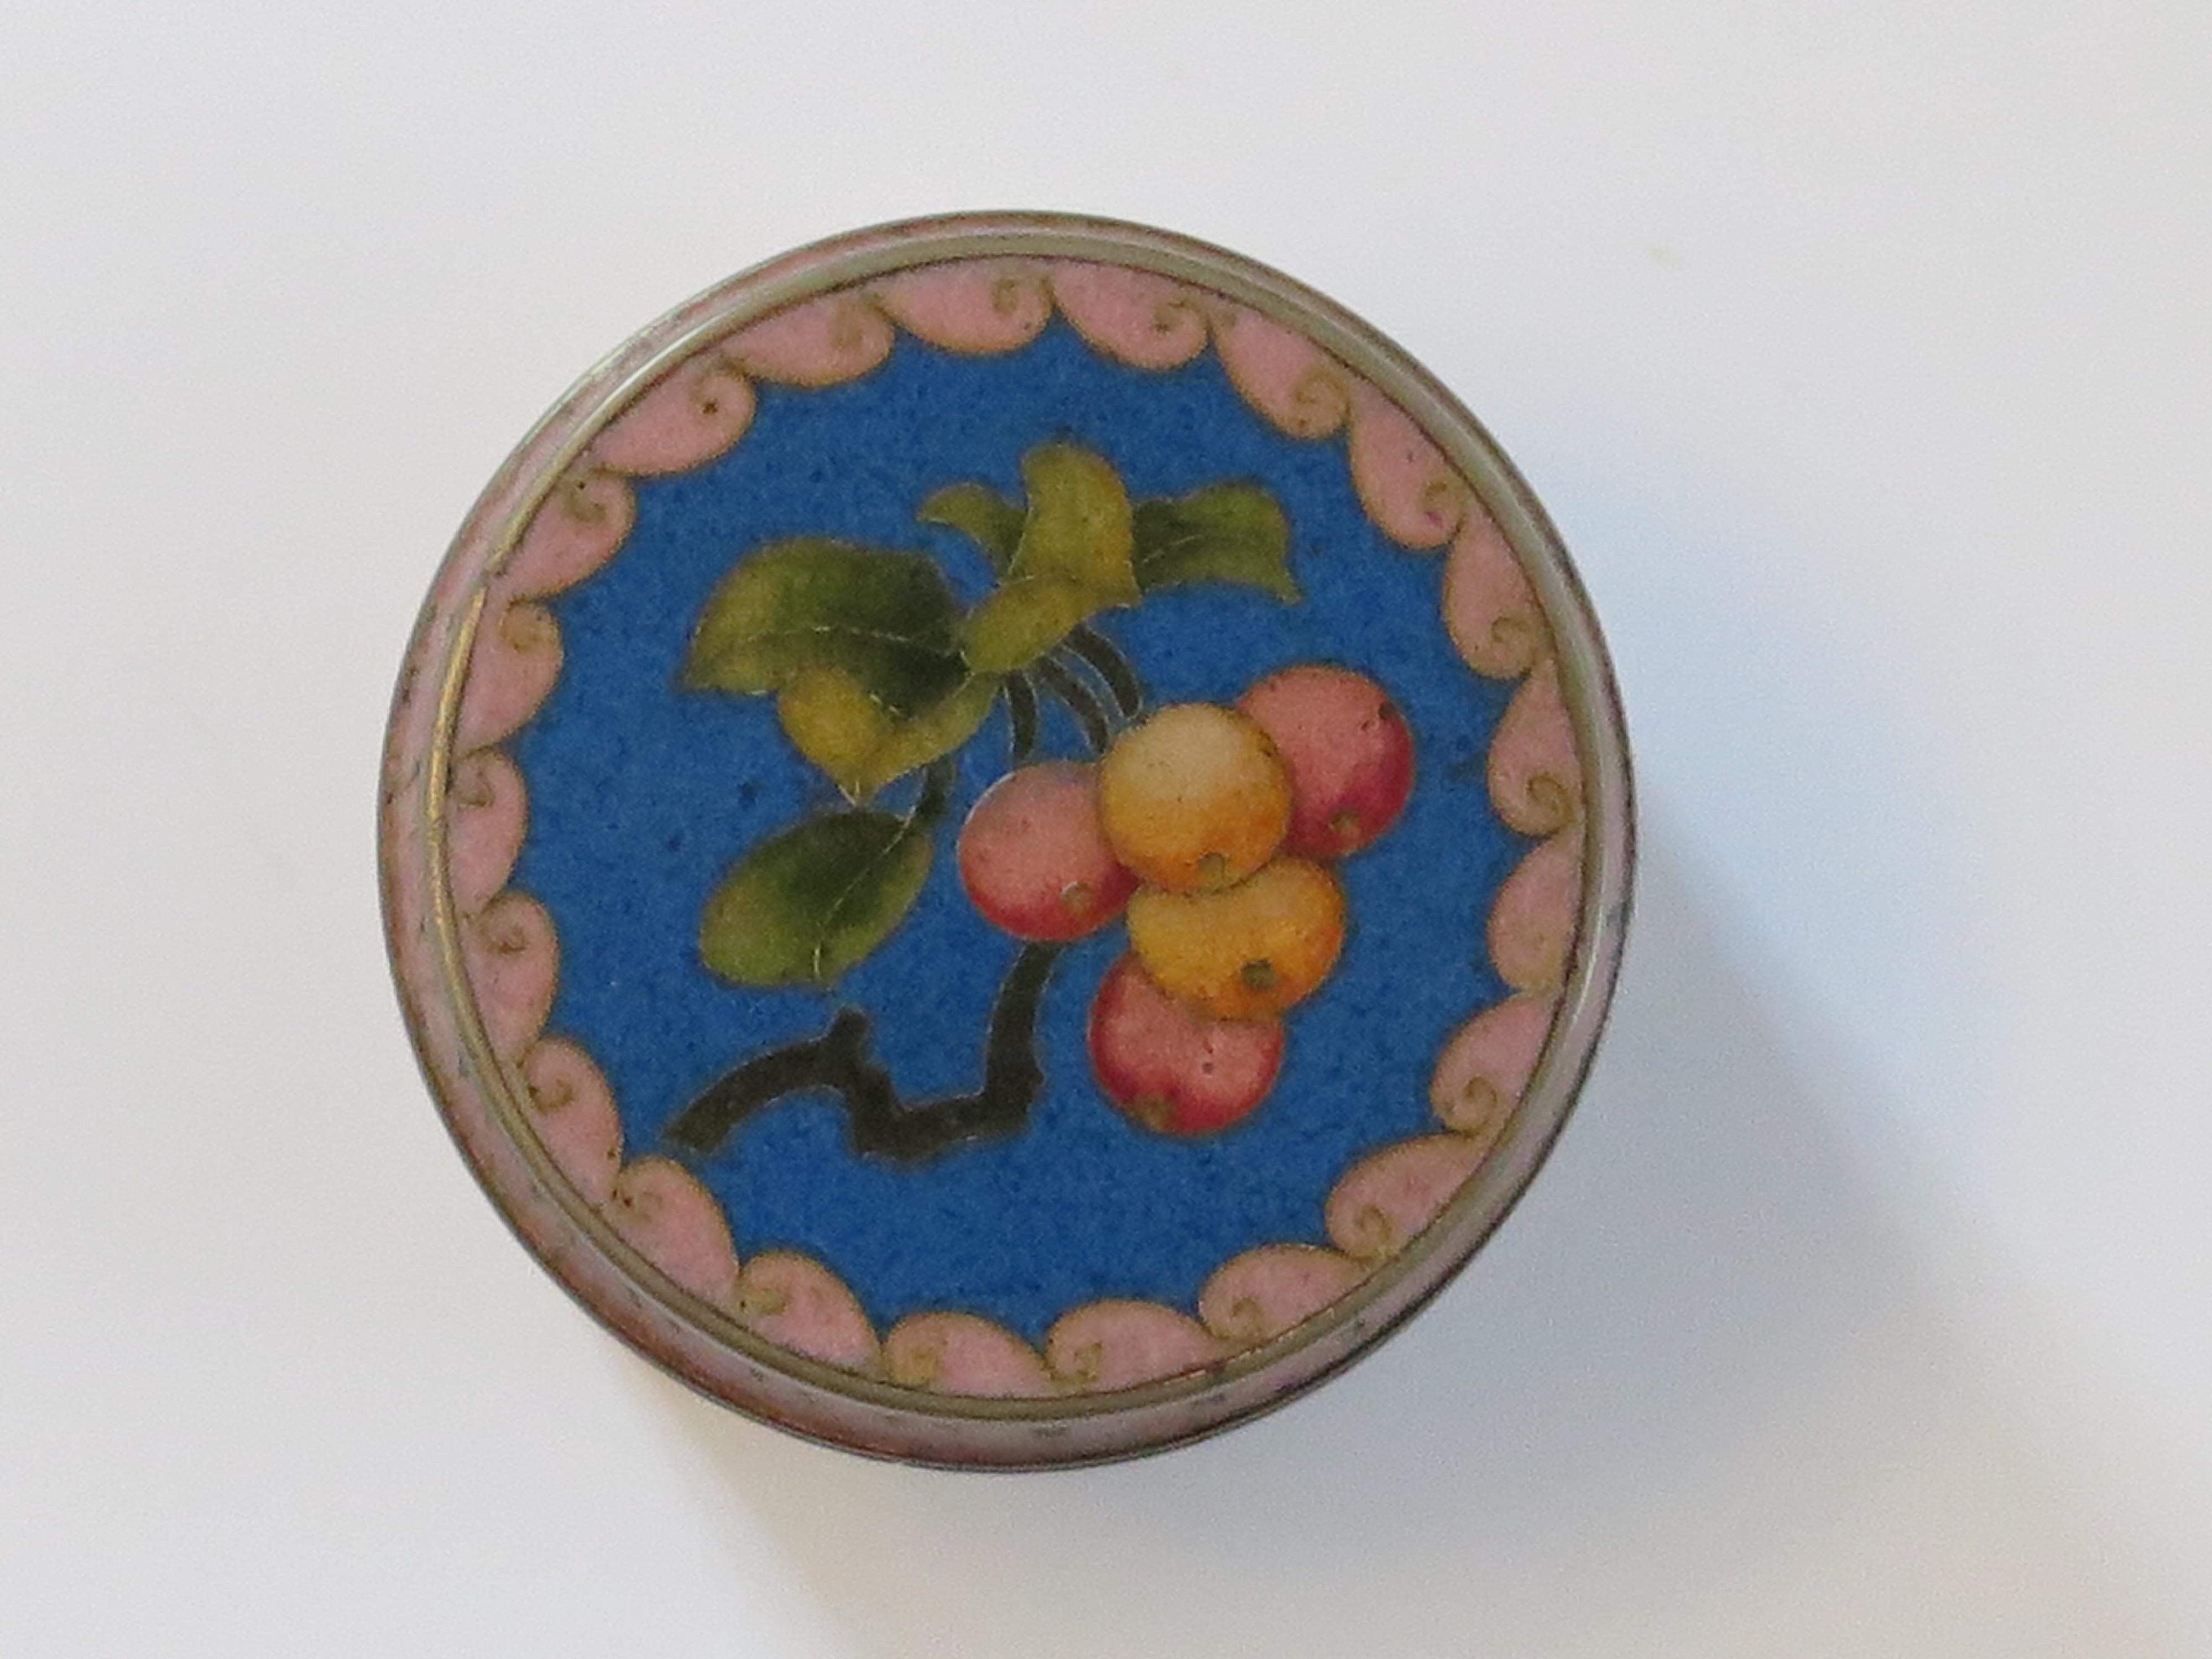 This is a very decorative Chinese cloisonné lidded box which we date to the 20th century, Circa 1930.

The box has a cylindrical shape, with its original lid and is all beautifully made with colored enamels set into a blue ground. 

The main